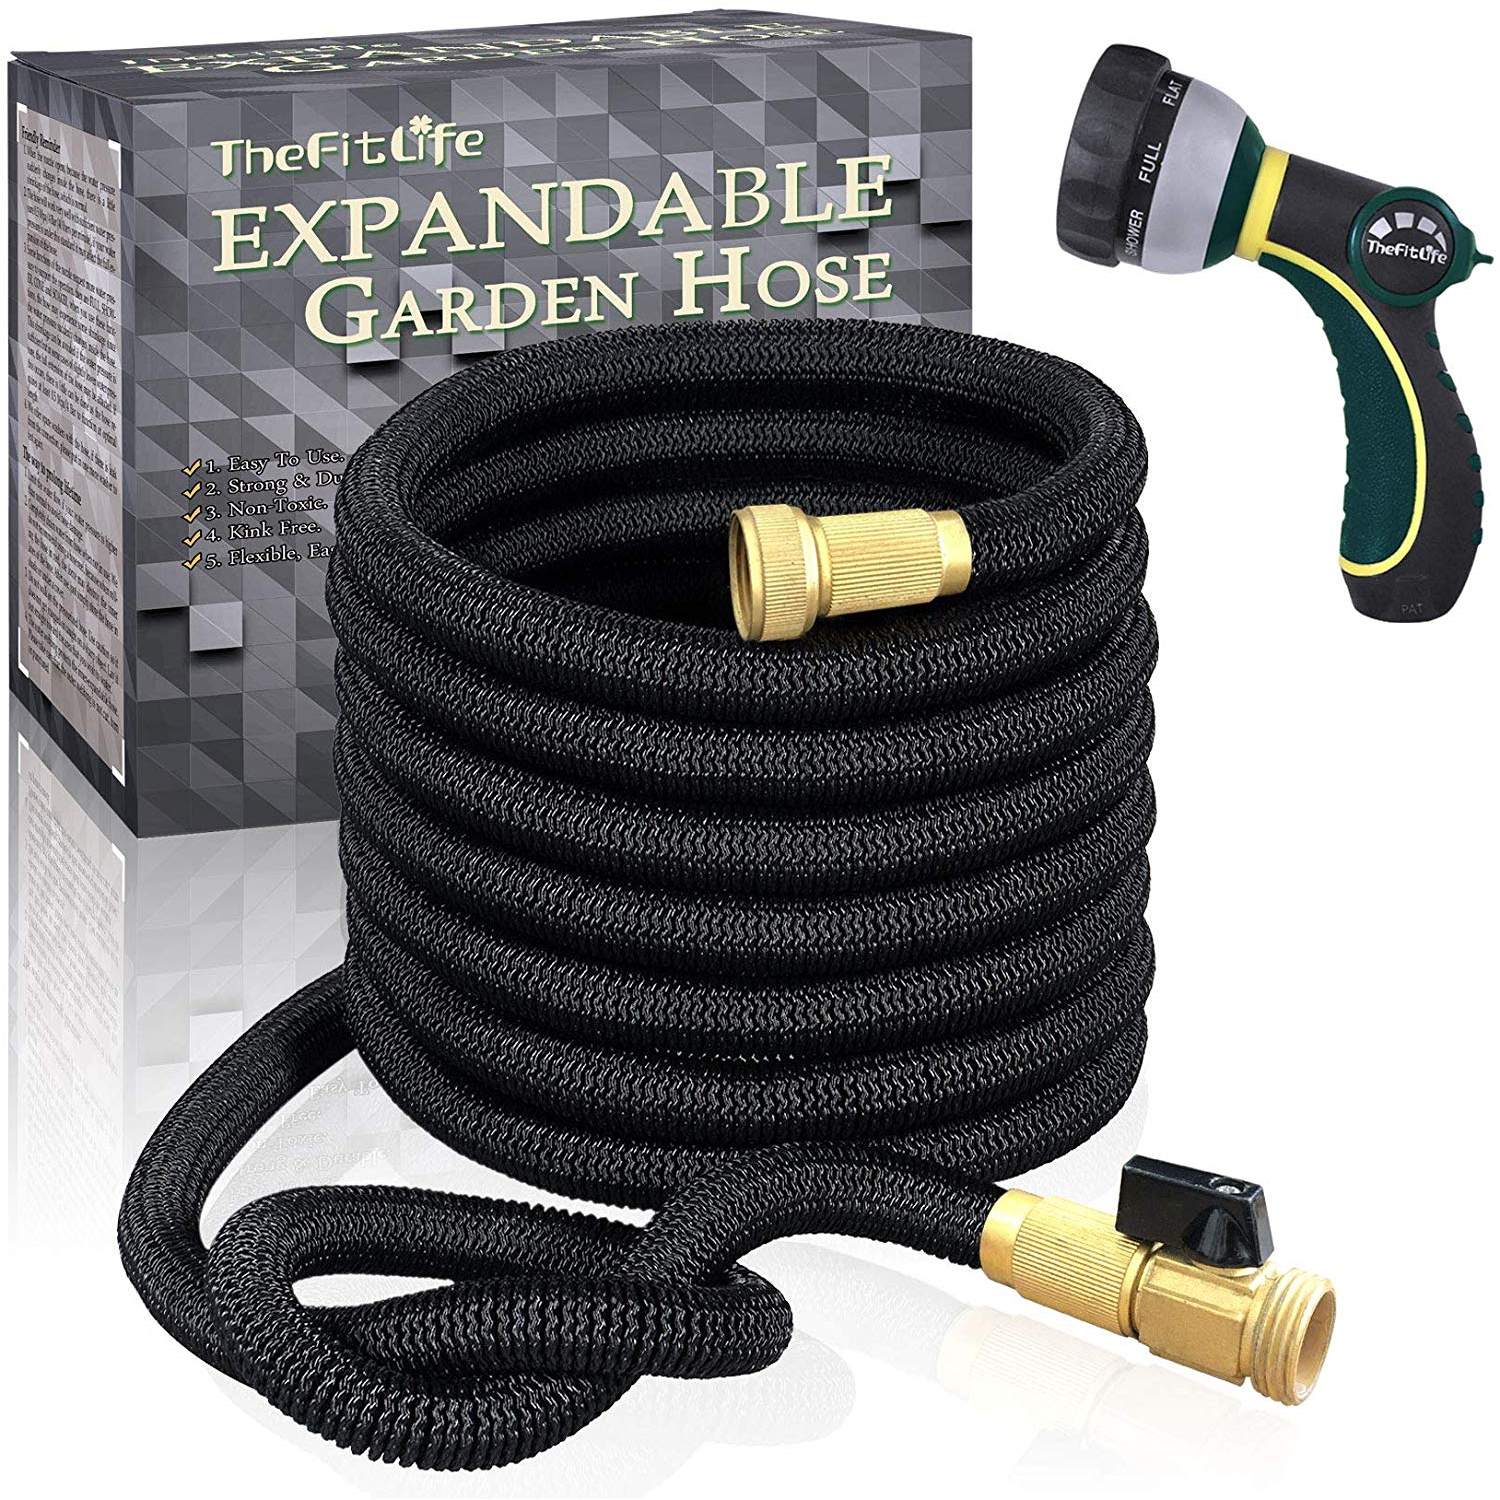 TheFitLife Flexible and Expandable Garden Hose